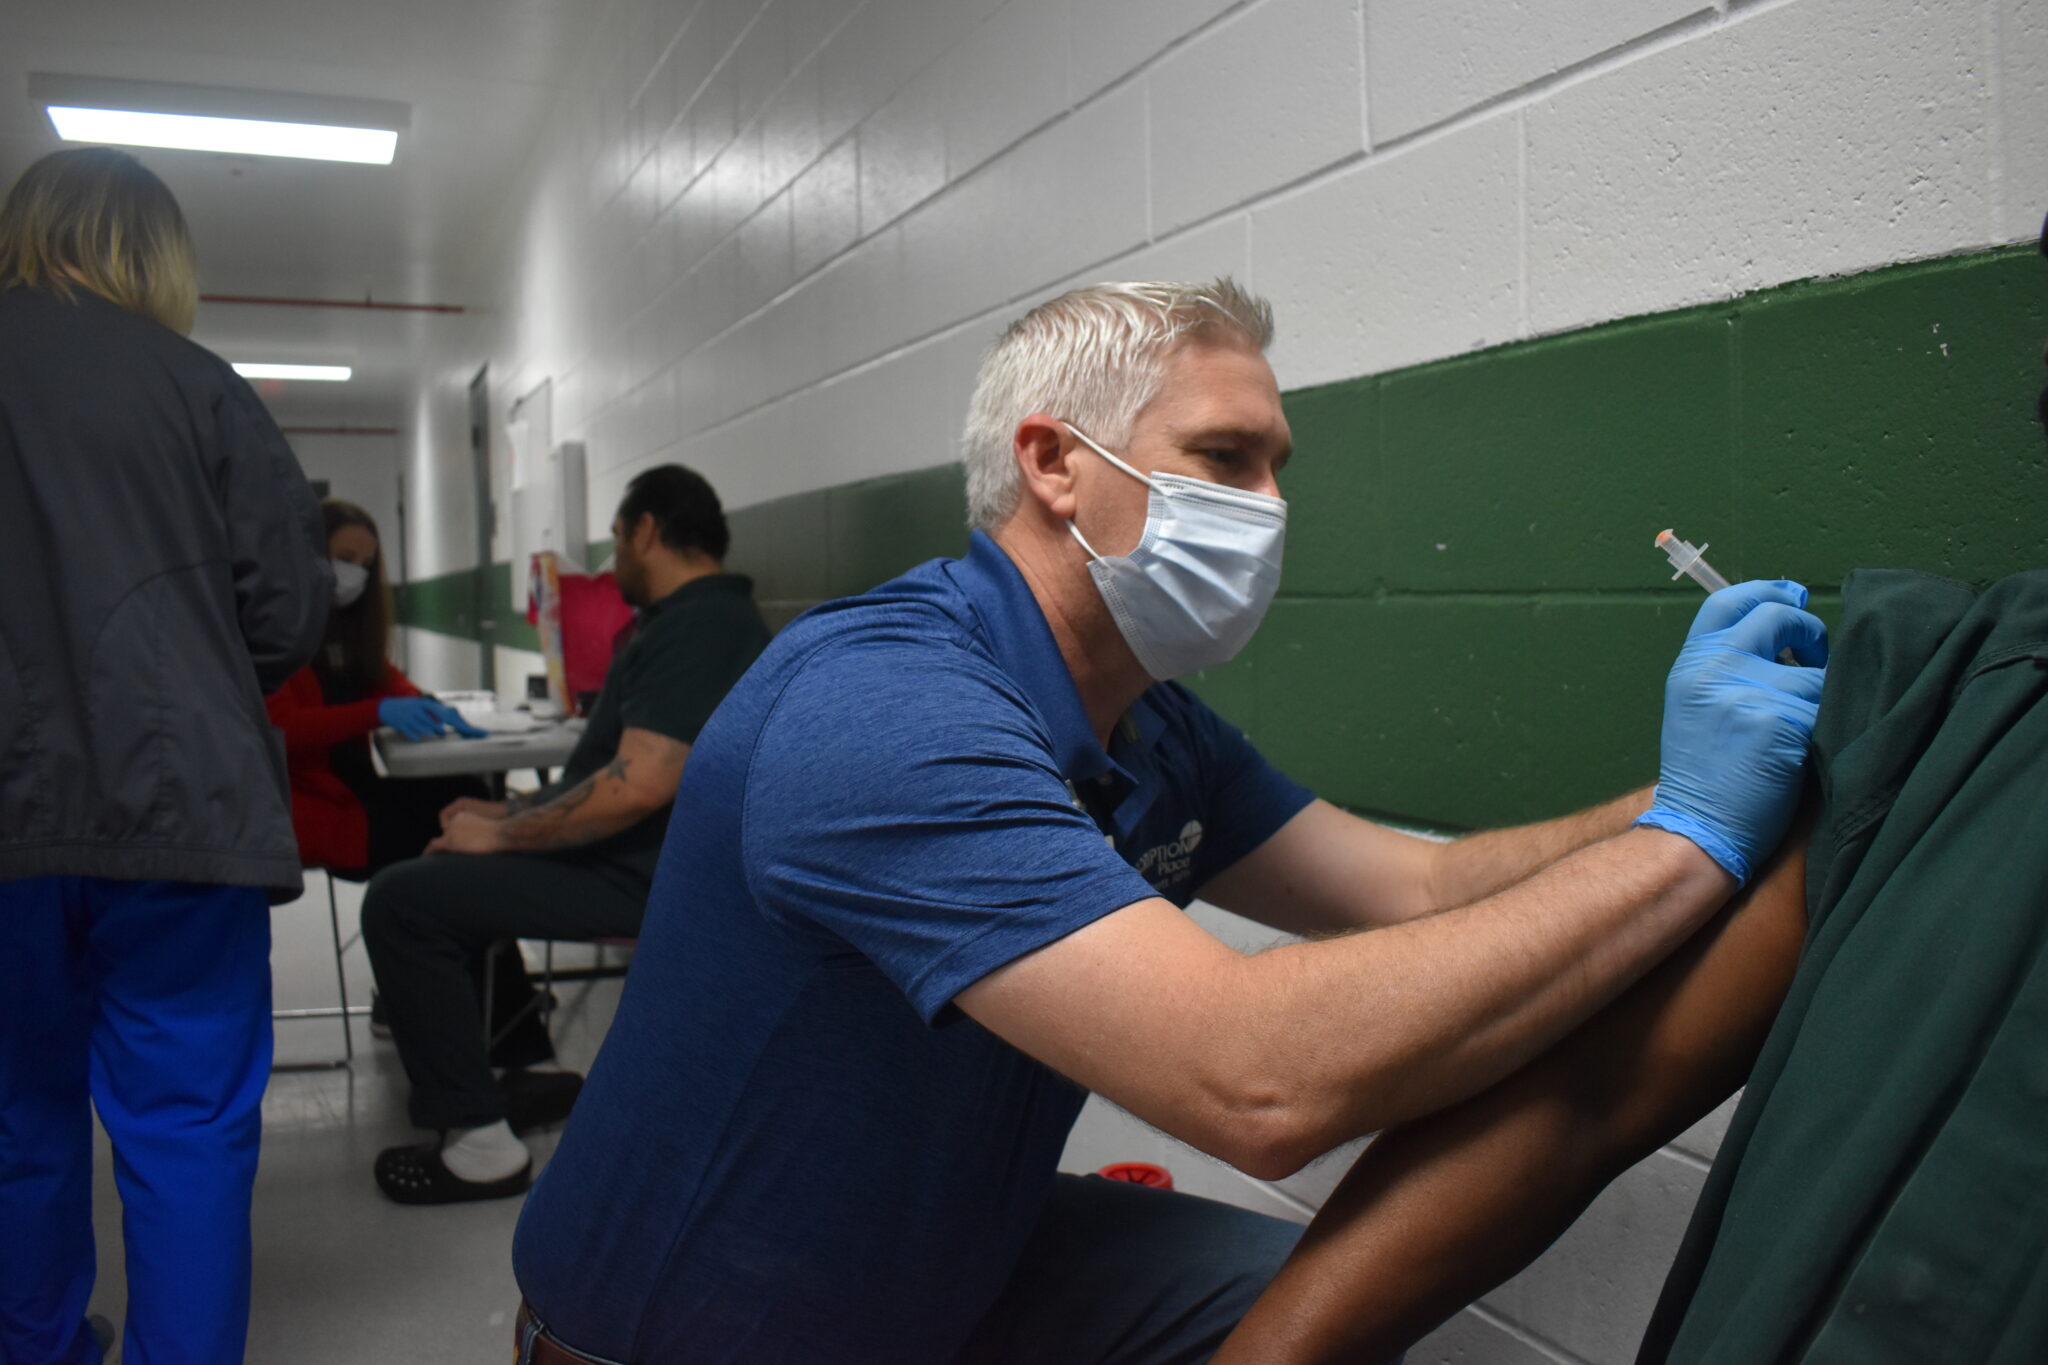 65 INMATES RECEIVE FIRST DOSE OF COVID VACCINE AT WALTON COUNTY JAIL